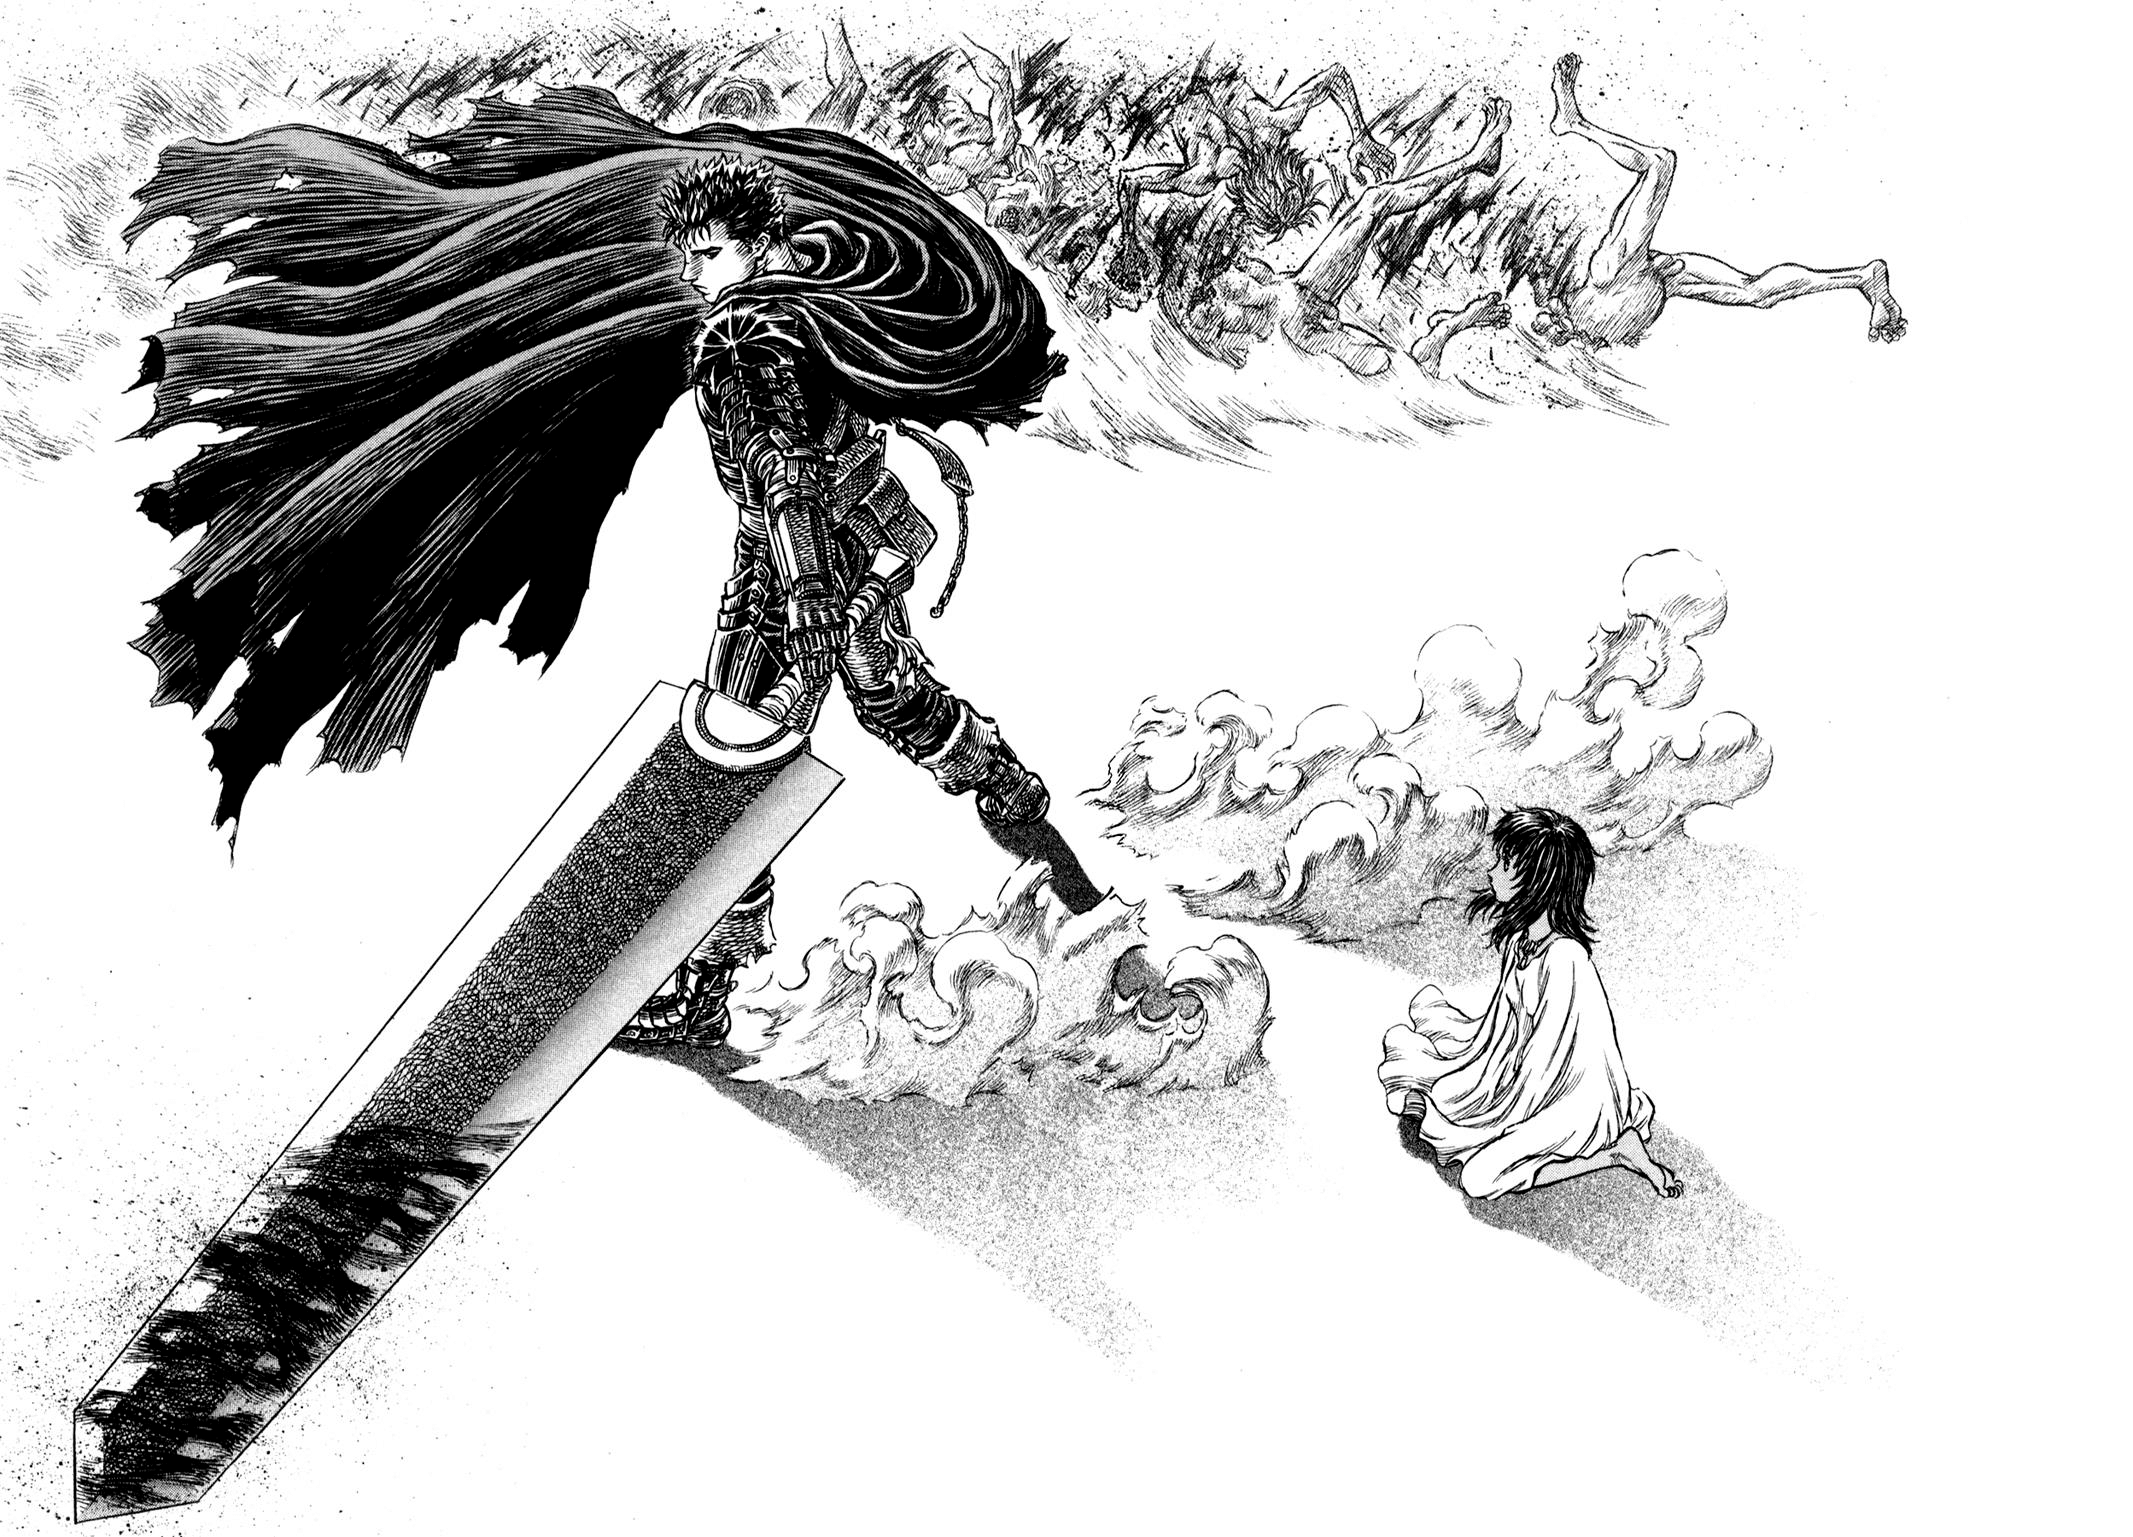 Berserk: Would Guts be the same without his companions?